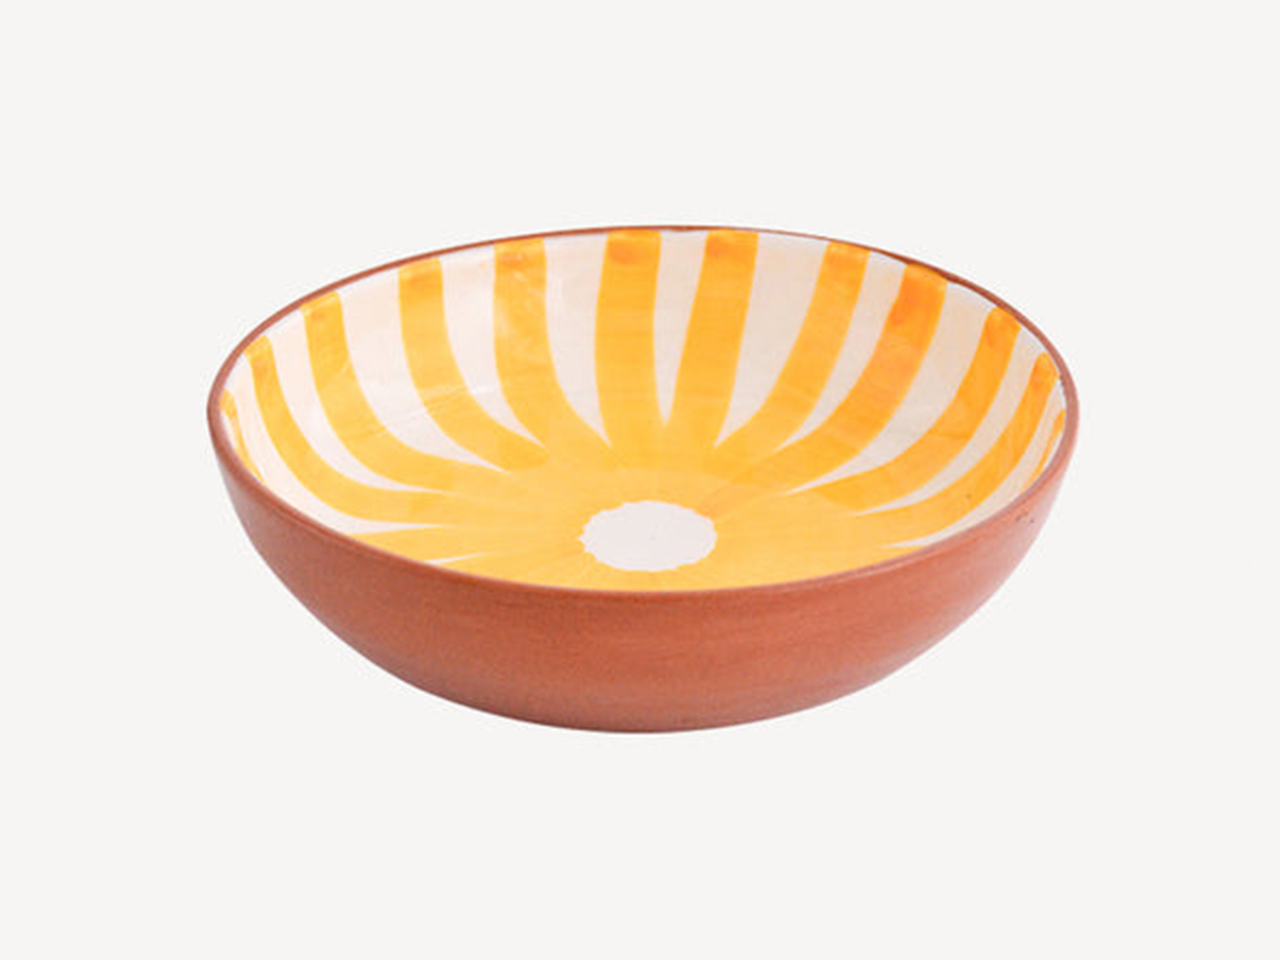 A painted and glazed patterned terracotta bowl from Casa Cubista for outdoor entertaining. 